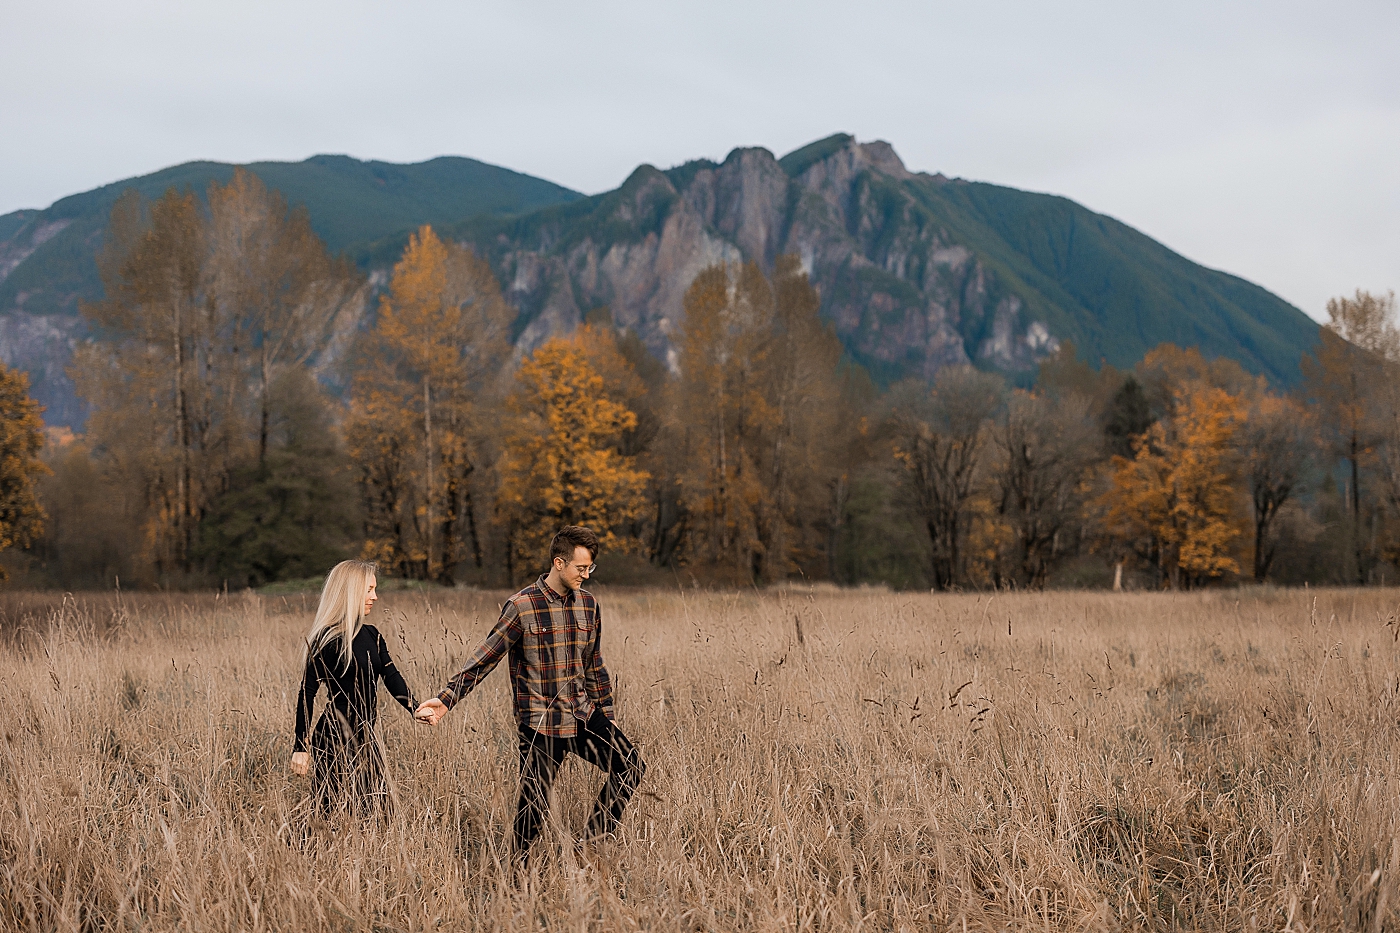 Couple walking through field in front of Mount Si. Photo by Megan Montalvo Photography.